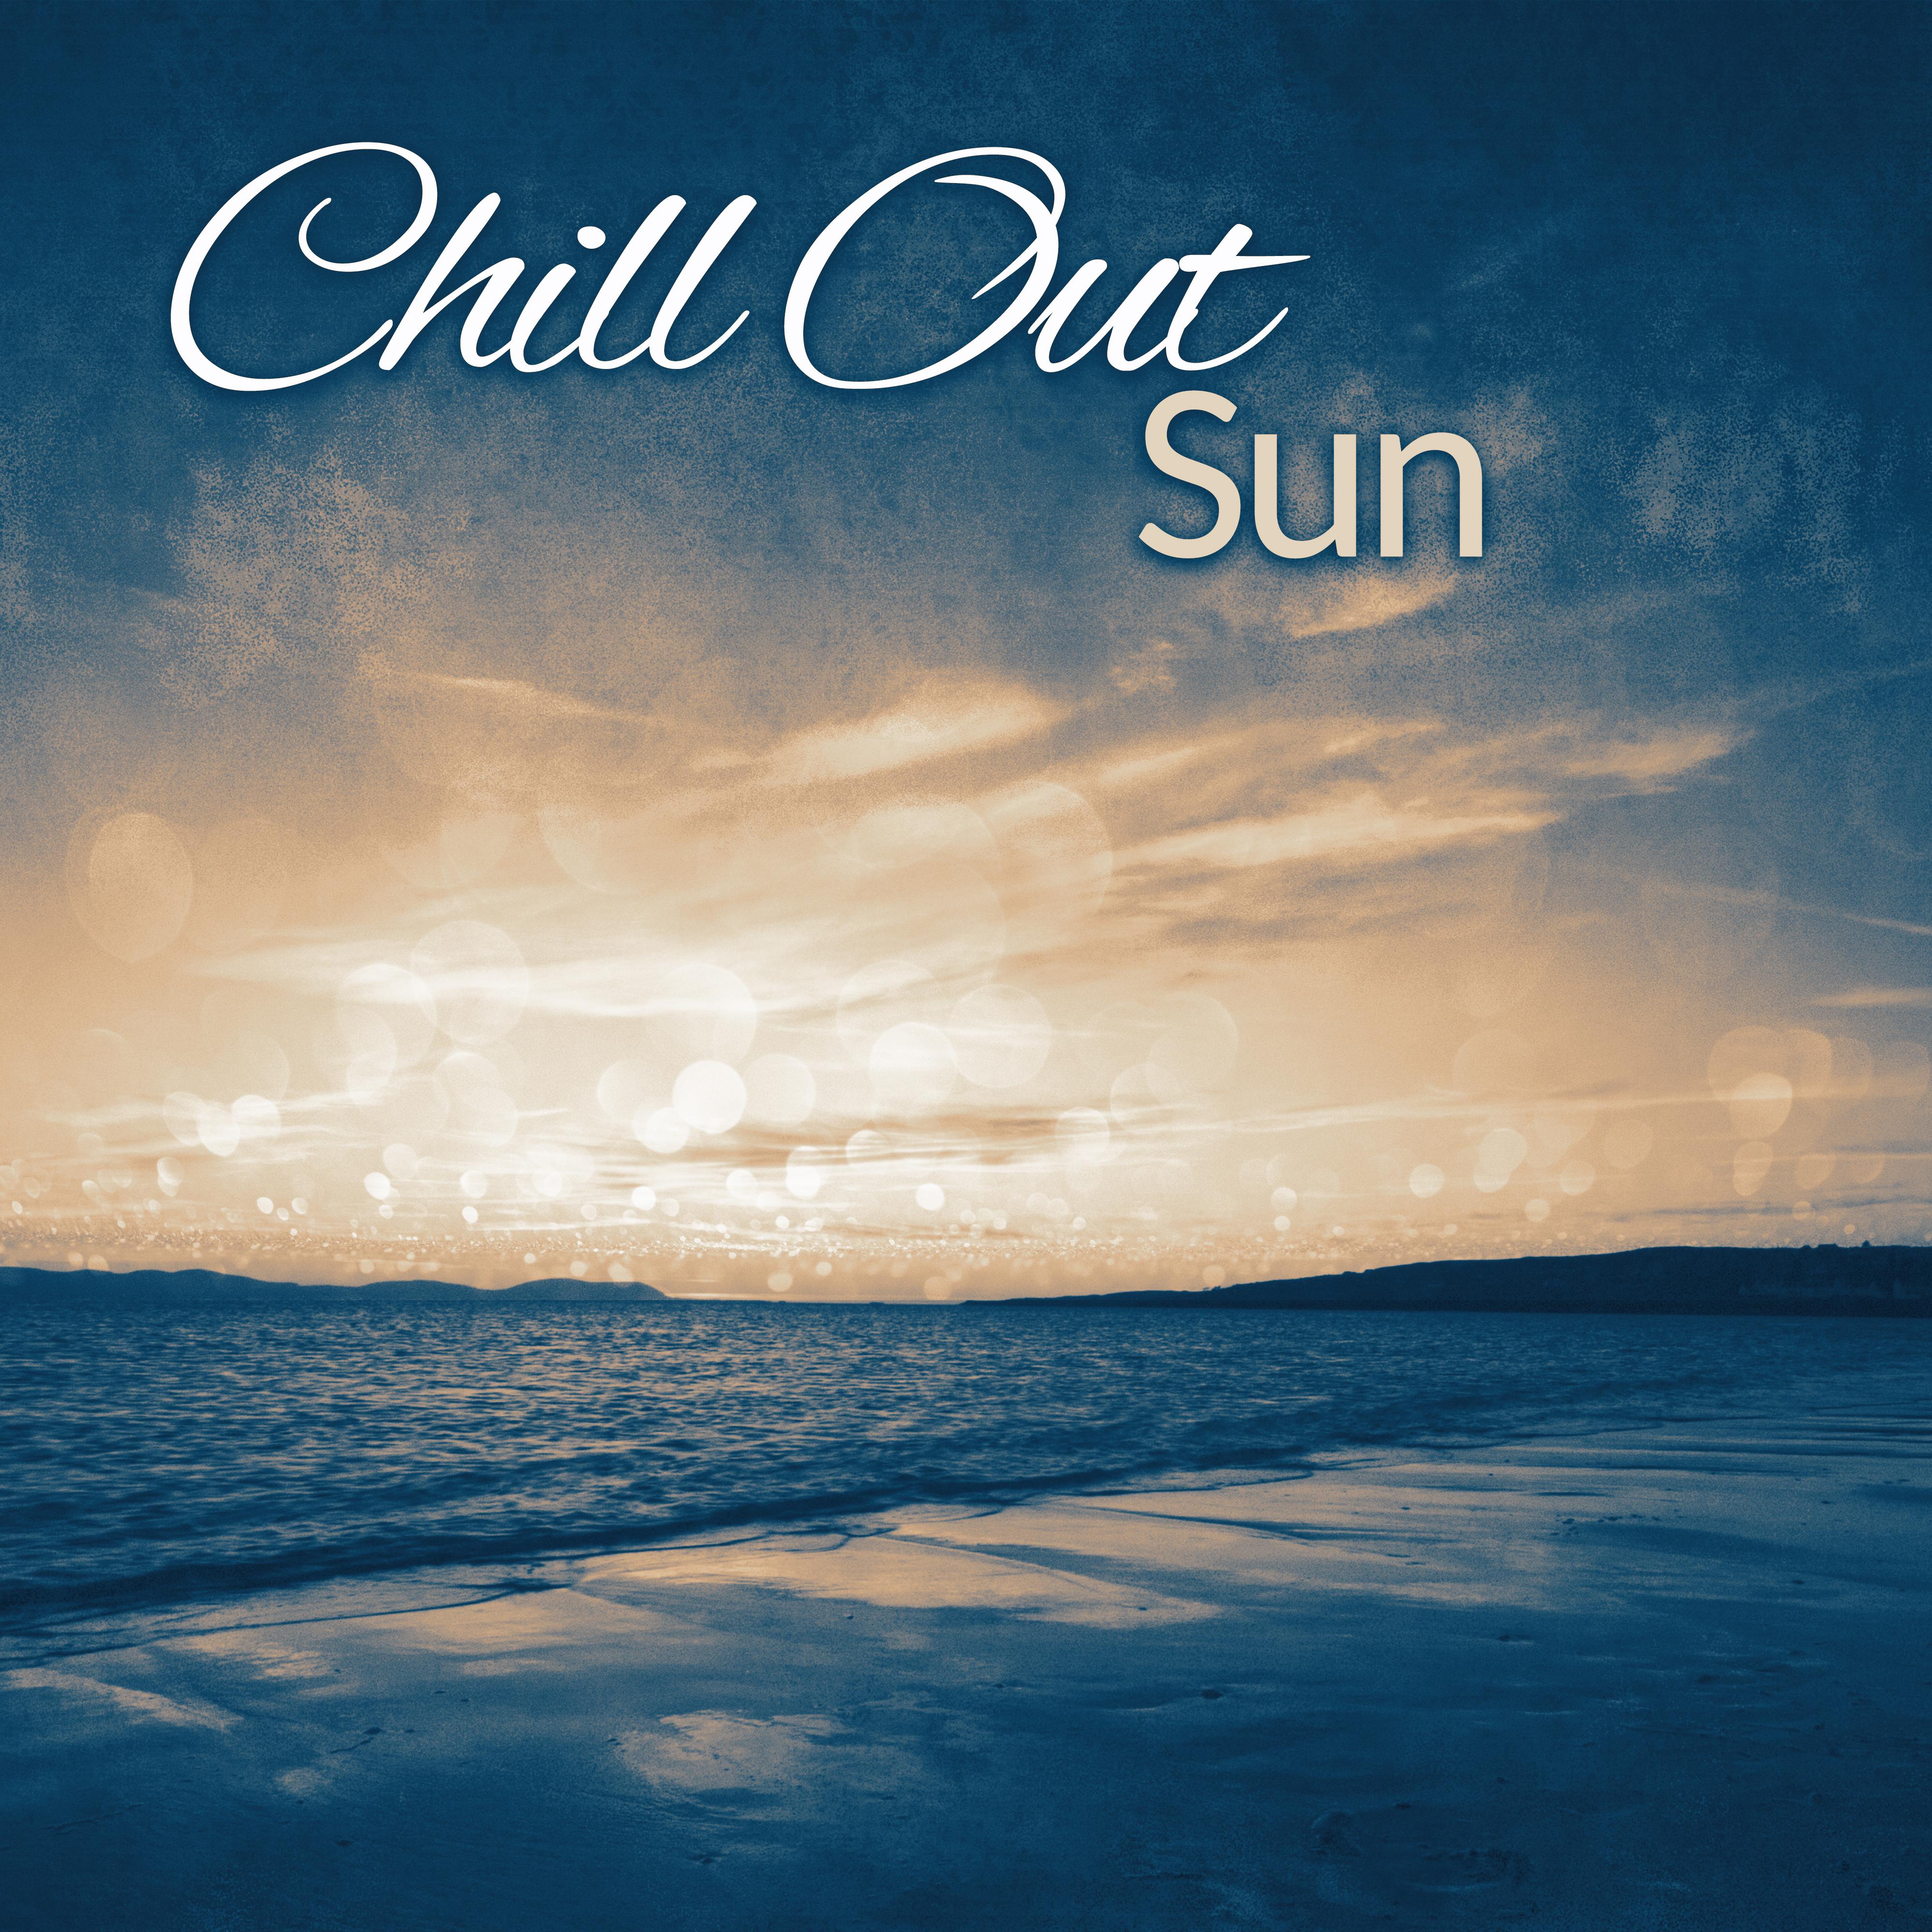 Chill Out Sun  Ultimate Chillout Music, Ibiza Party, Chill Out Relaxation, Miami Chill, Chillout Trip